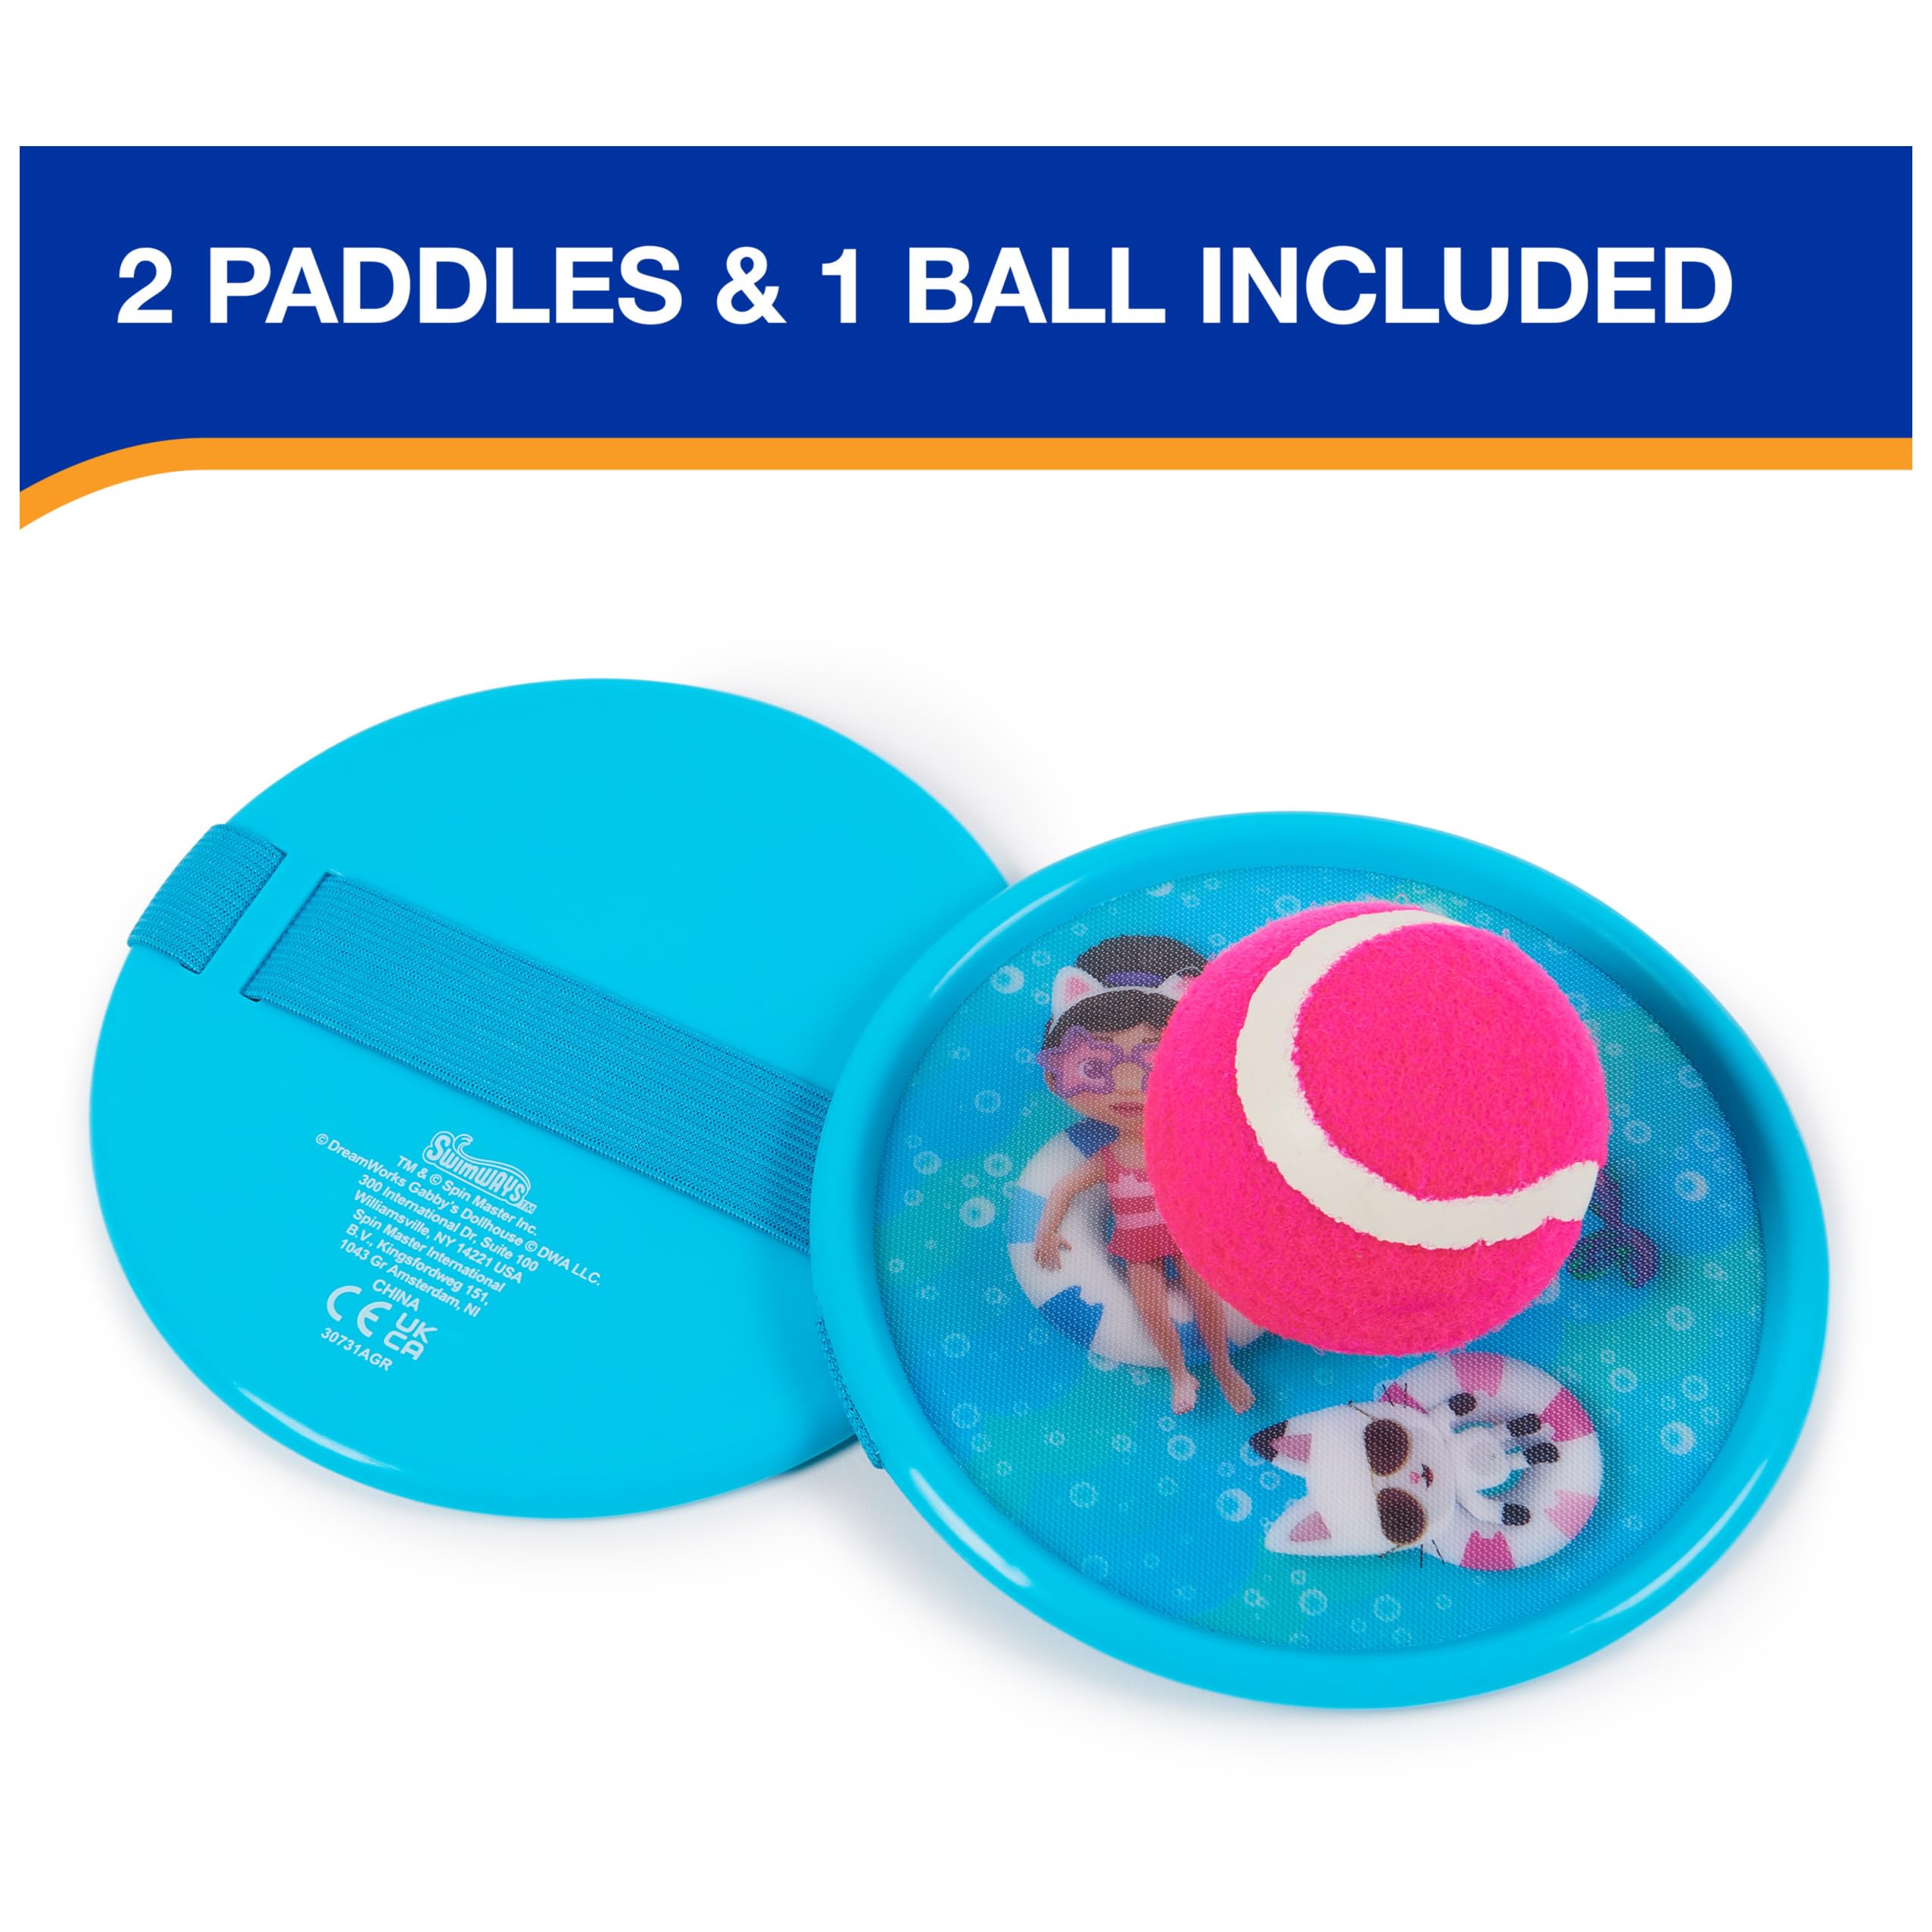 Swimways Gabby's Dollhouse Catch Game, Swimming Pool Accessories & Kids Outdoor Toys, Gabby's Dollhouse Party Supplies & Yard Games for Kids Aged 4 & Up